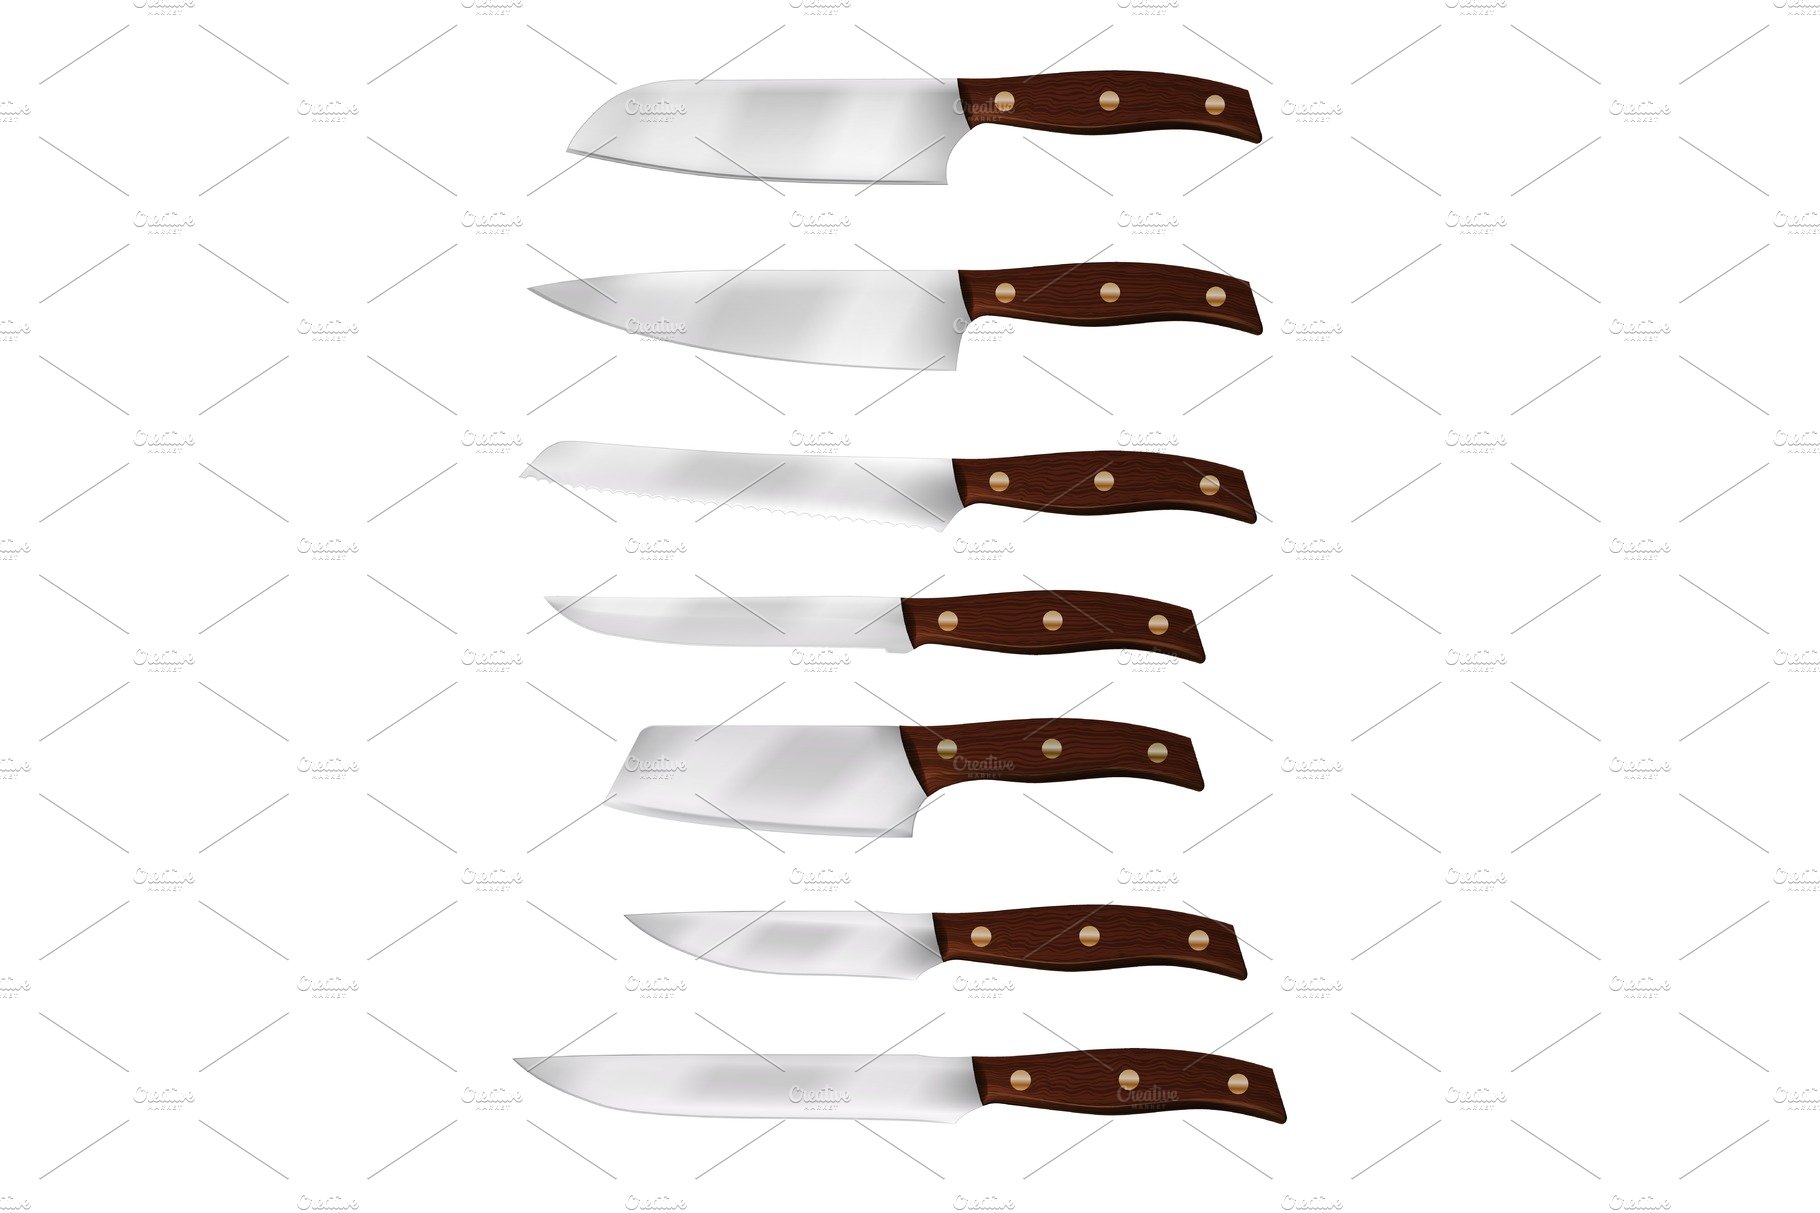 Realistic chef knife and kitchen cover image.